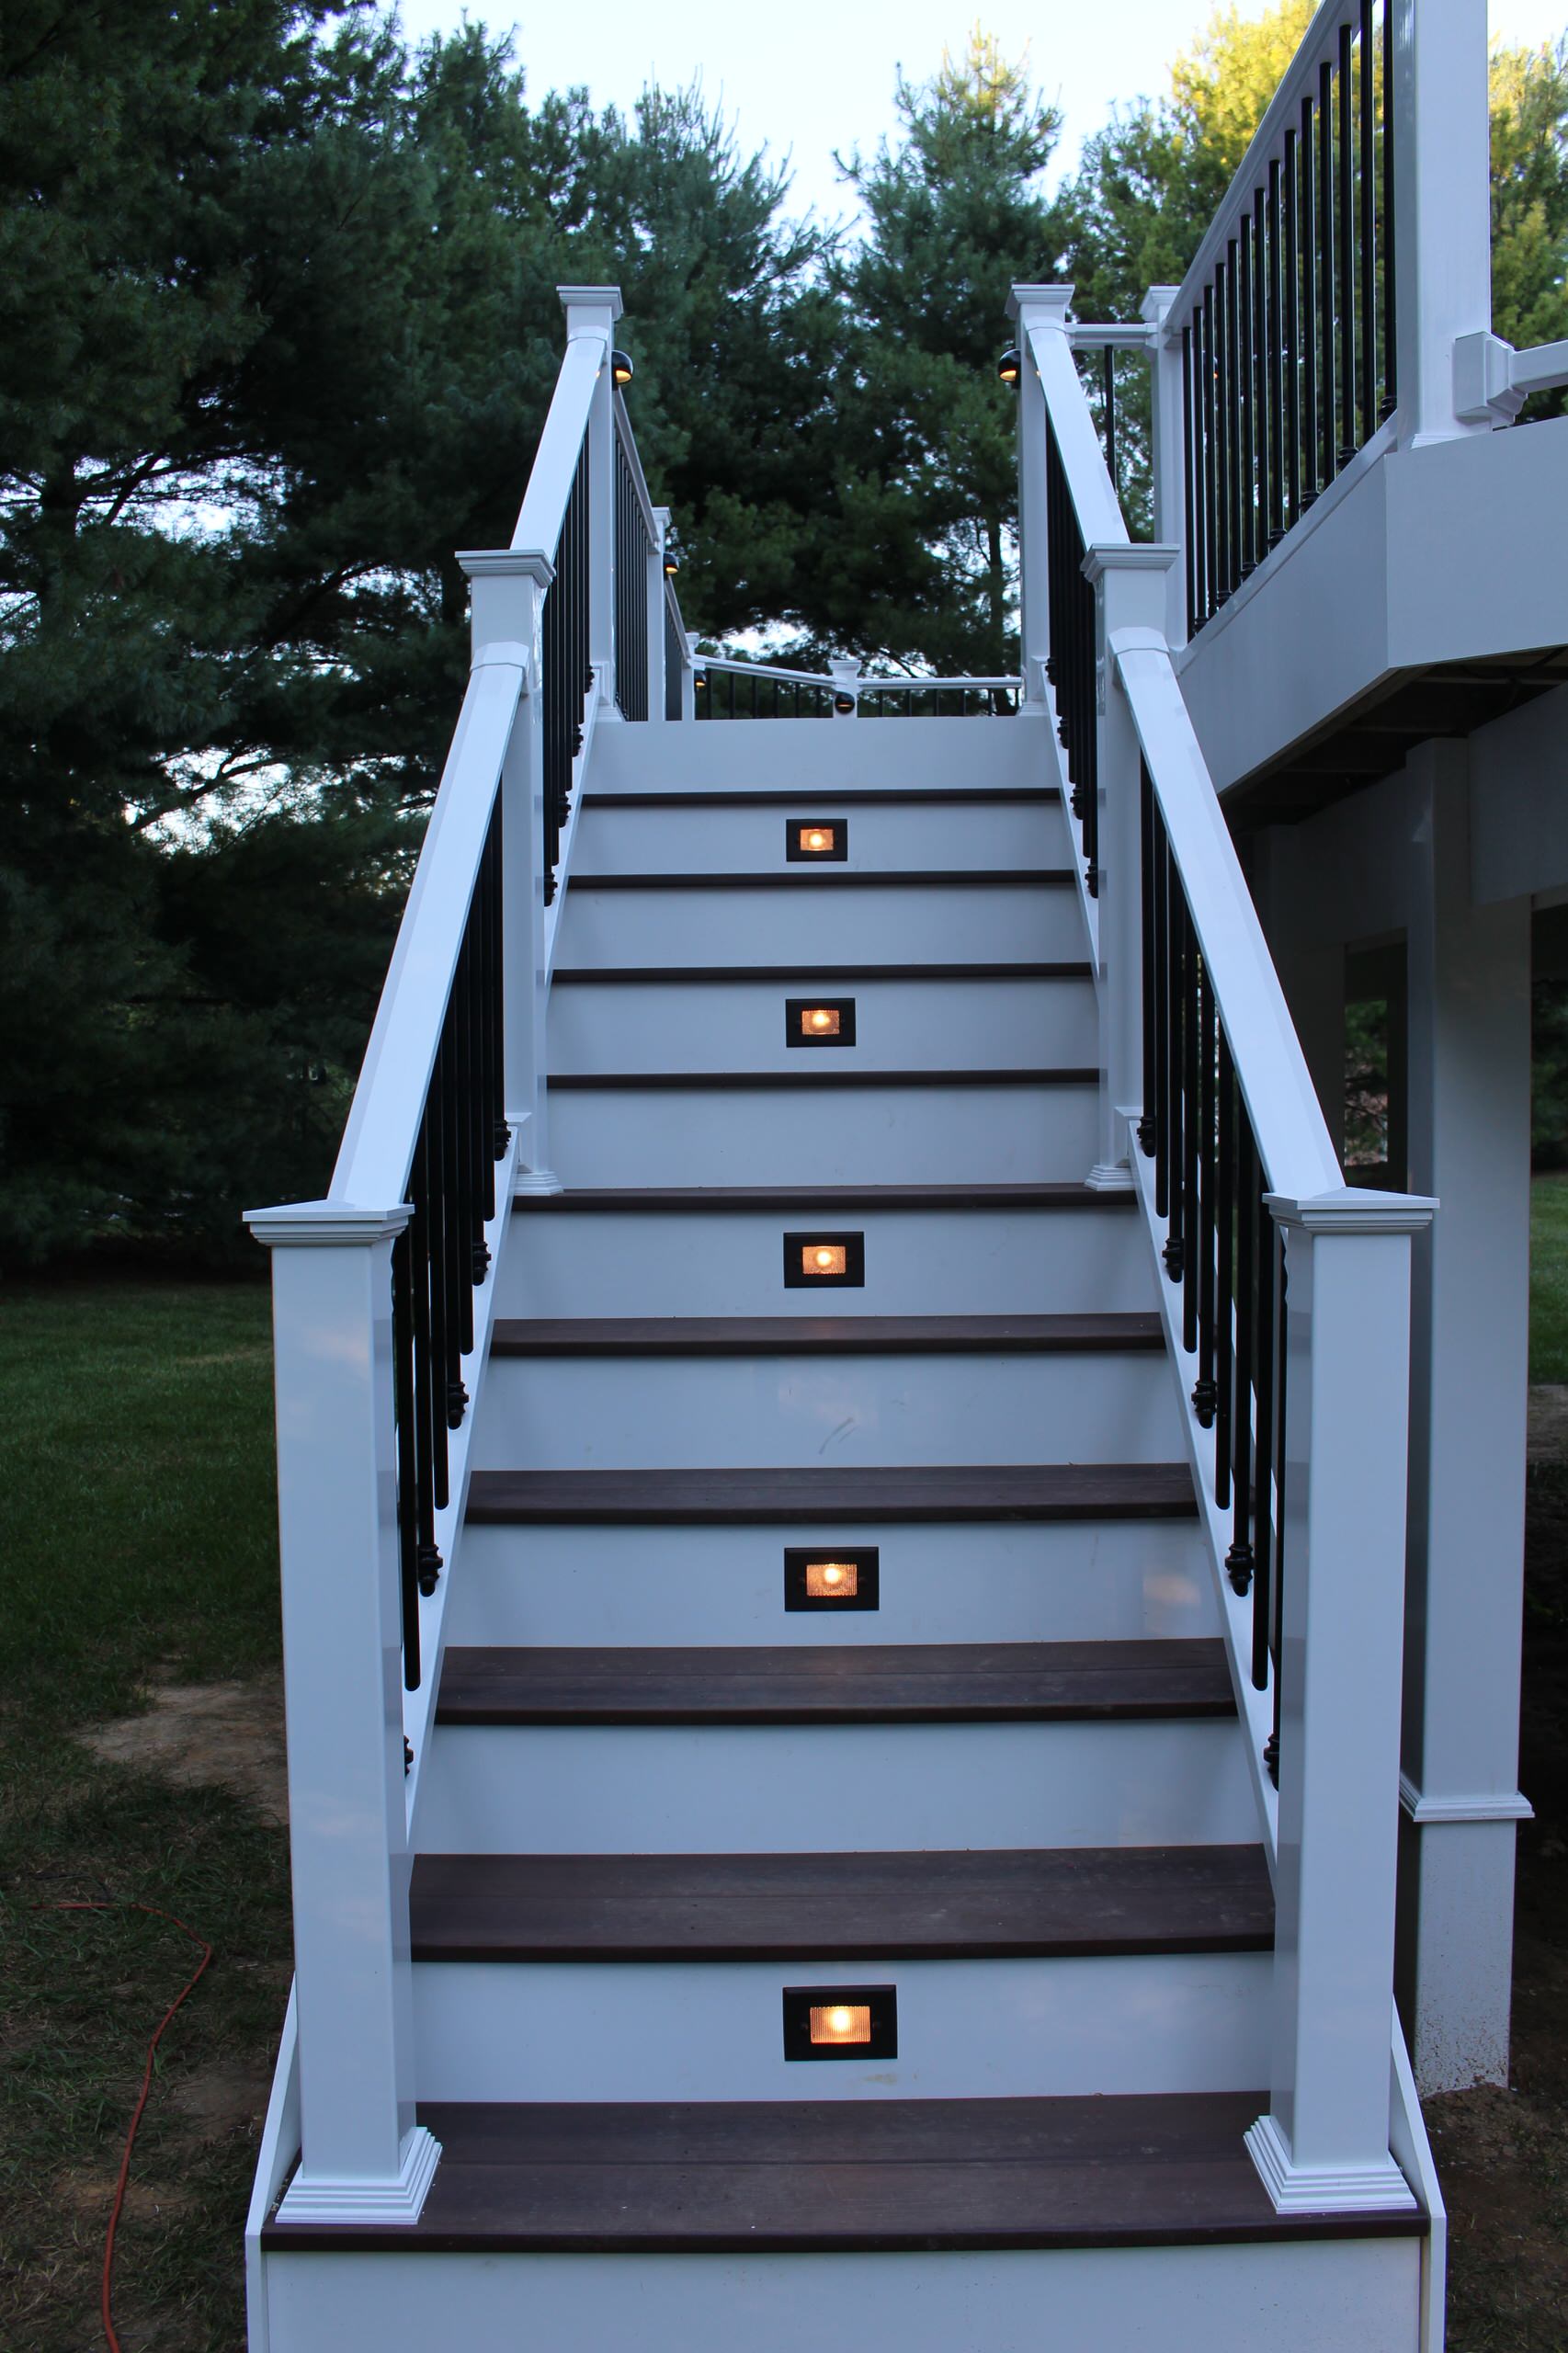 Lighted stairway